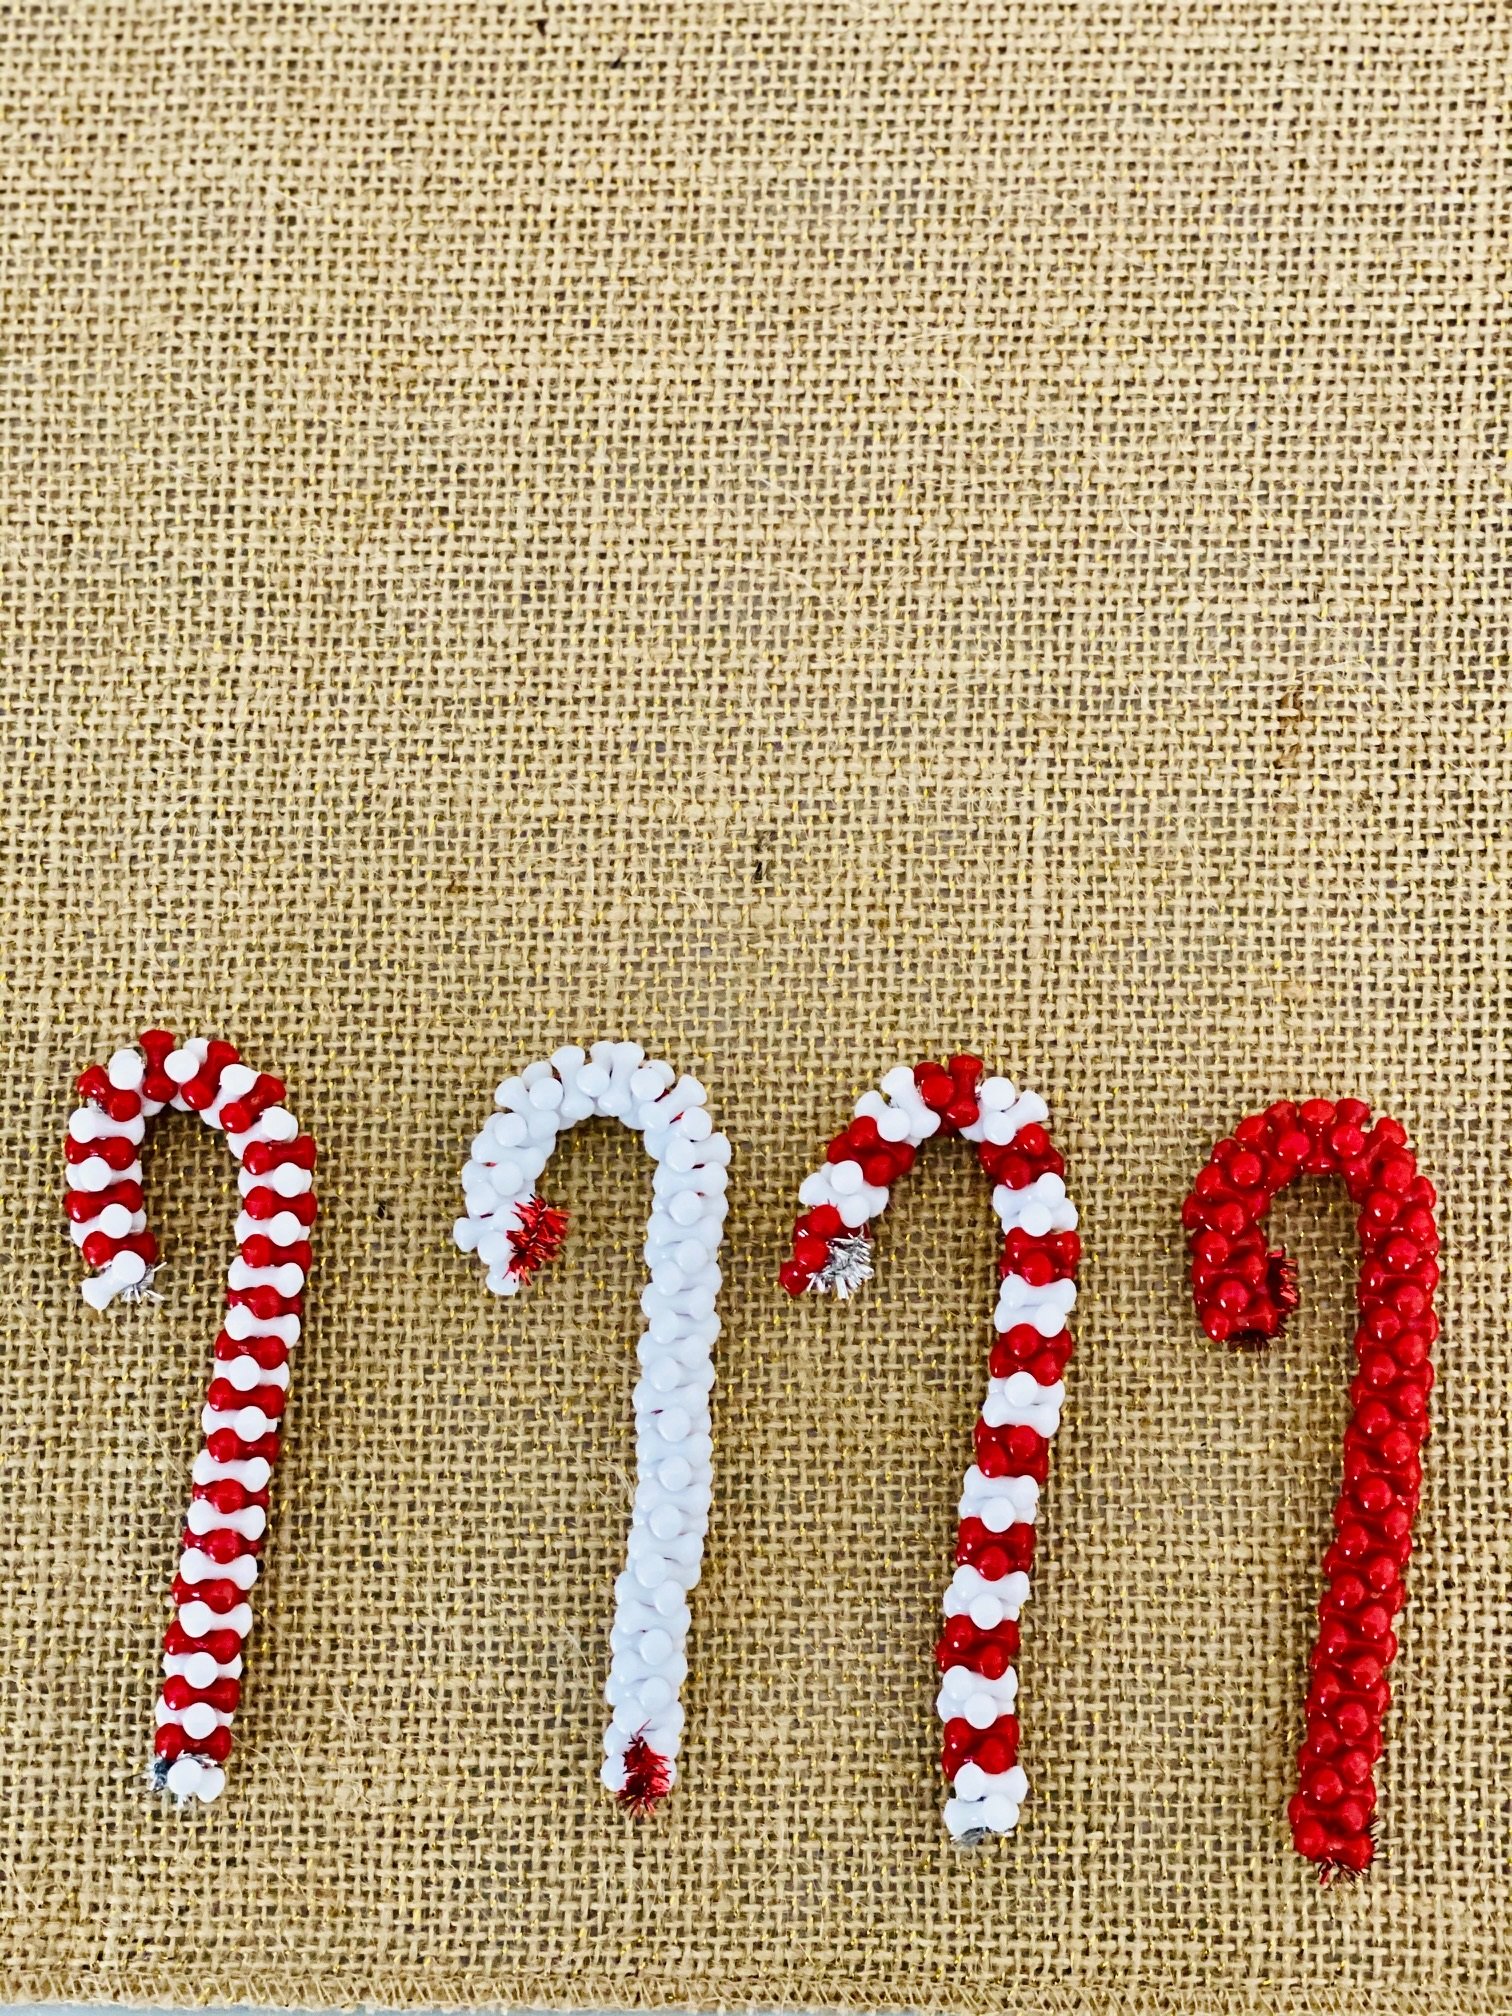 Candy Cane Ornaments with Beads